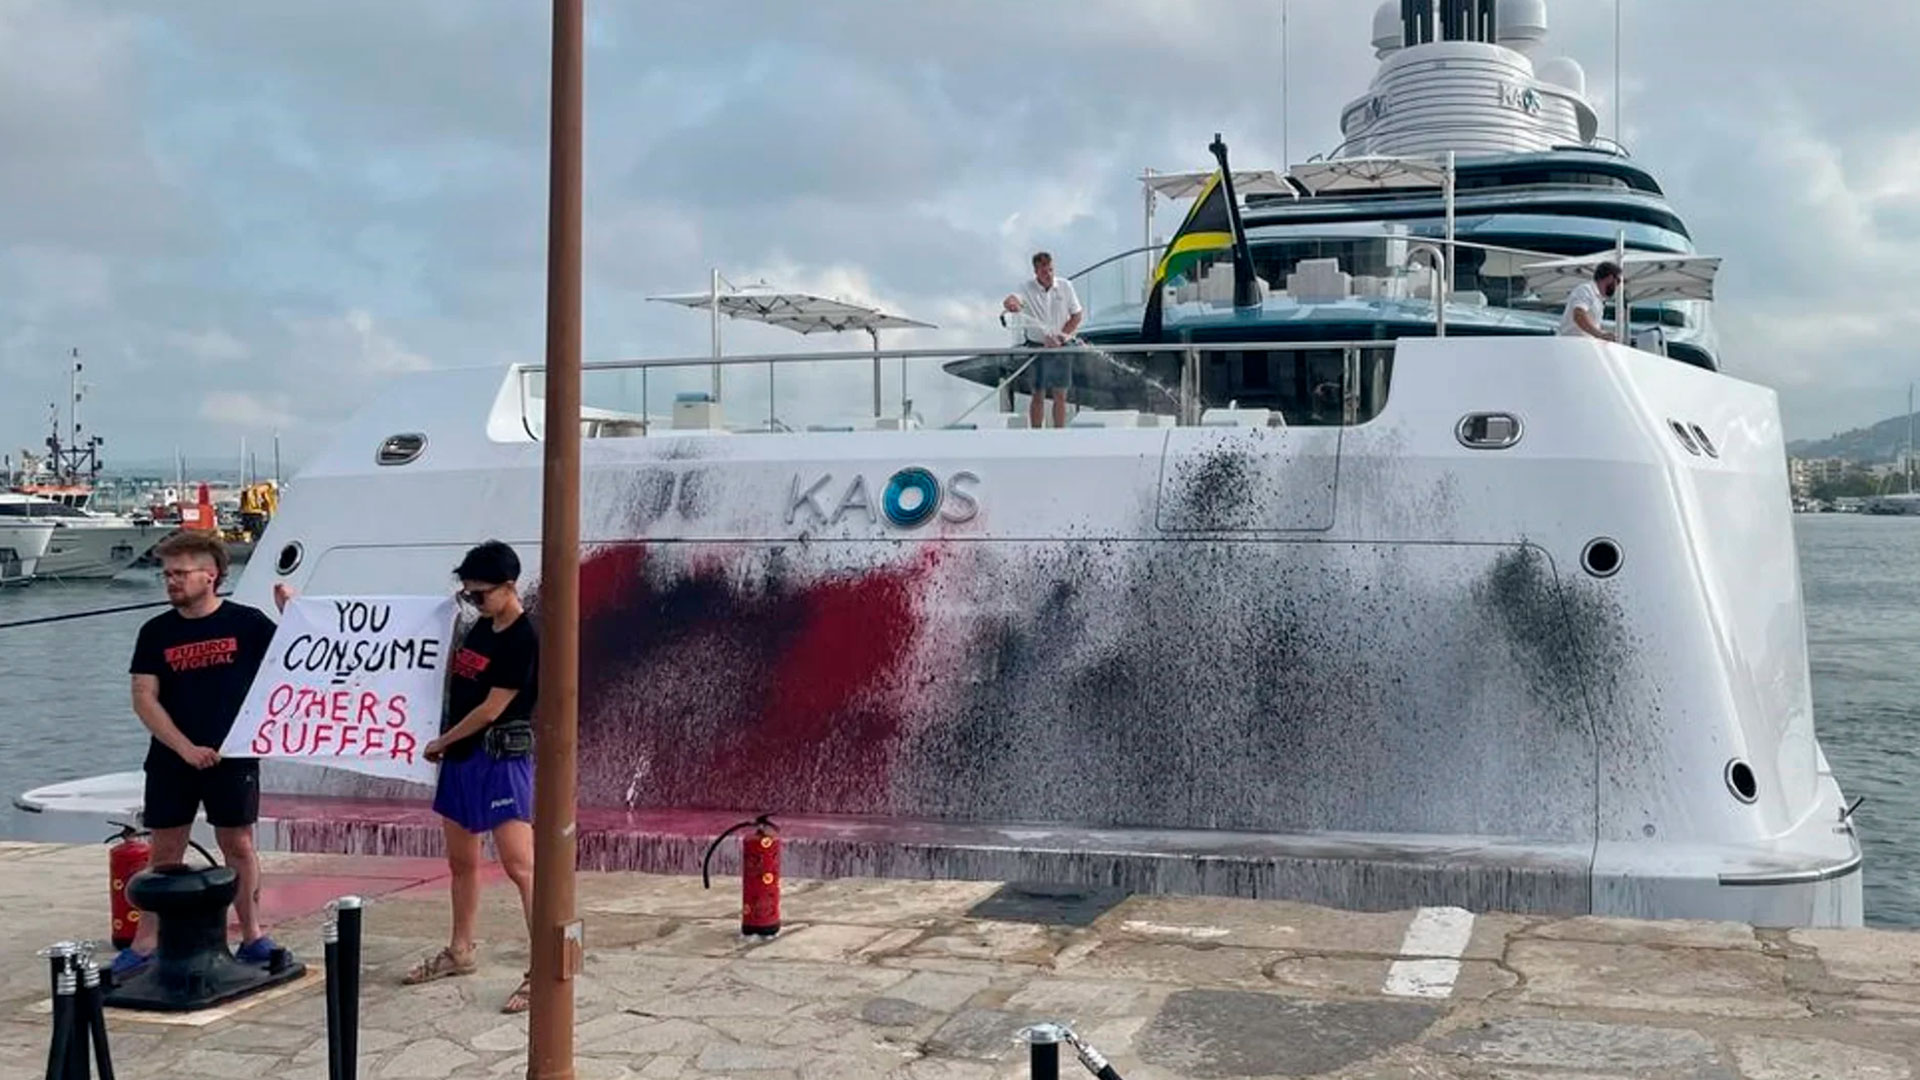 AENIB strongly condemns the vandalisation of the megayacht Kaos in Ibiza